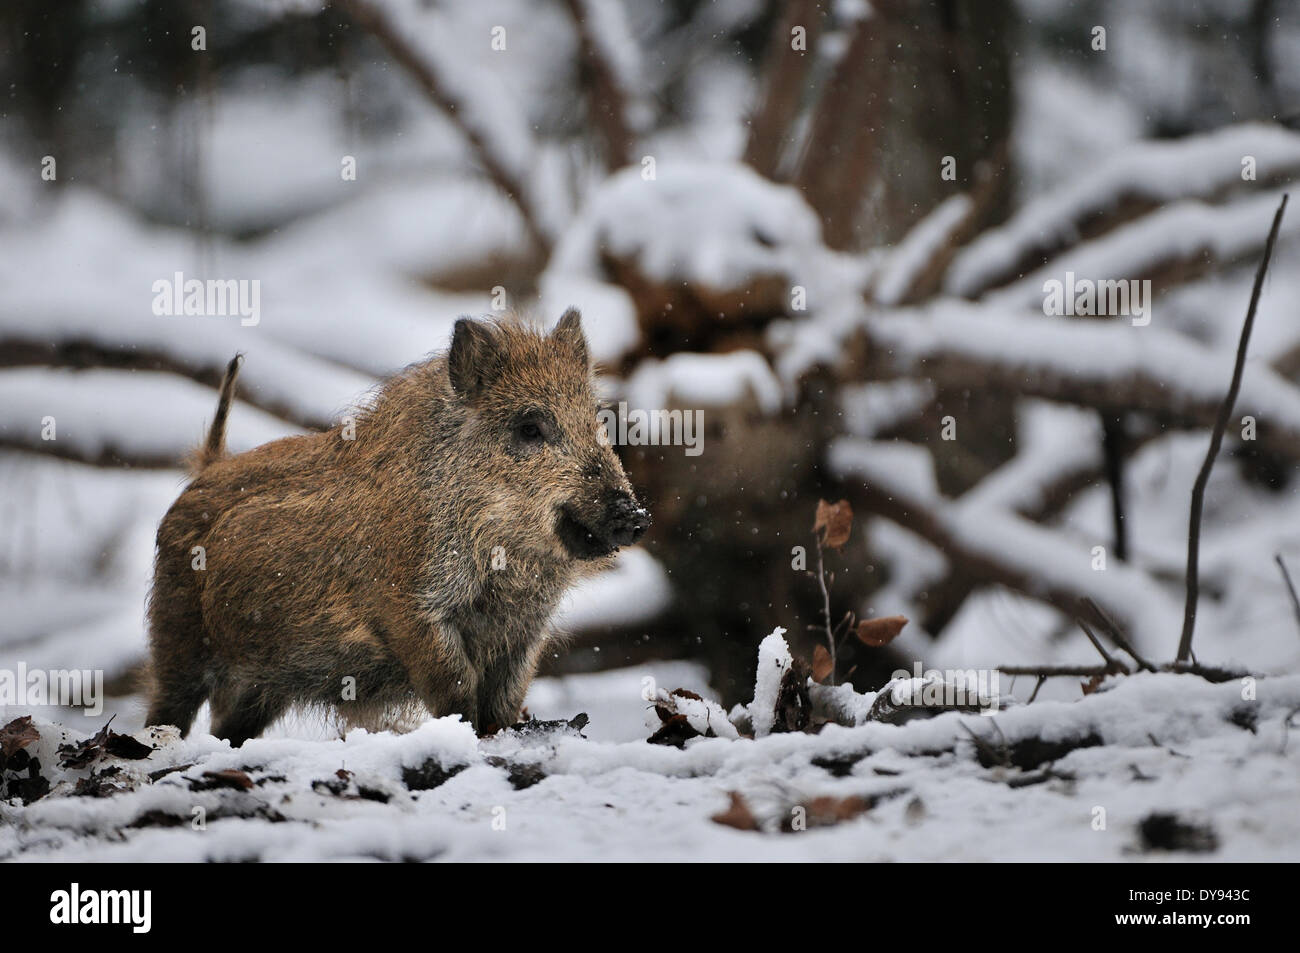 Wild boar Sus scrofa scrofa sow sows wild boars cloven-hoofed animal pigs pig vertebrates mammals winter snow cold animal an Stock Photo